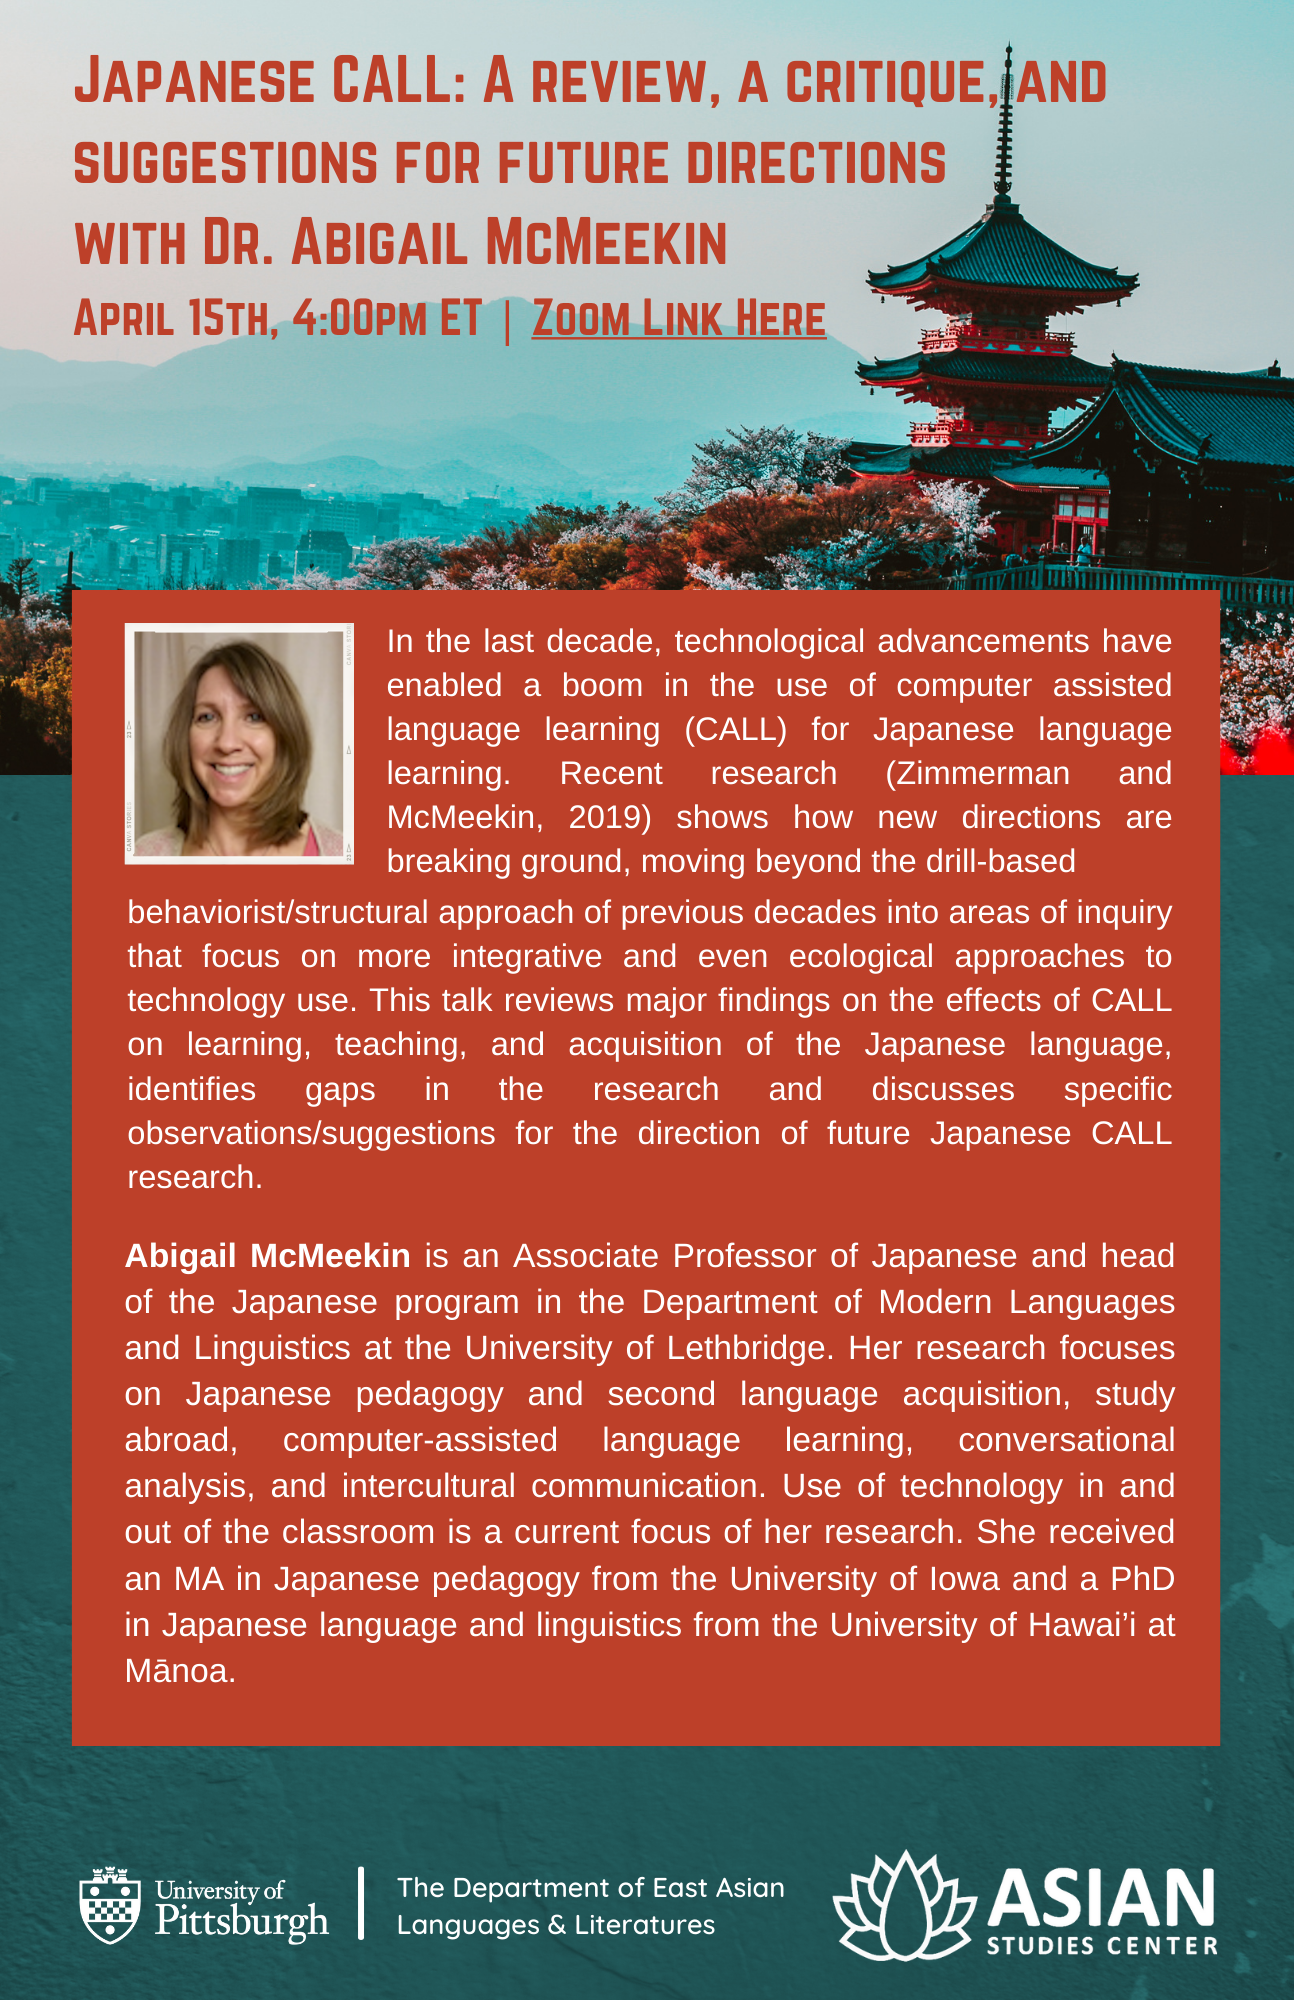 Japanese CALL event description; accessible flyer with text attached; text is tomato-colored and white-on-a-tomato-background; the flyer's background is teal with an image of a Japanese pagoda skyline